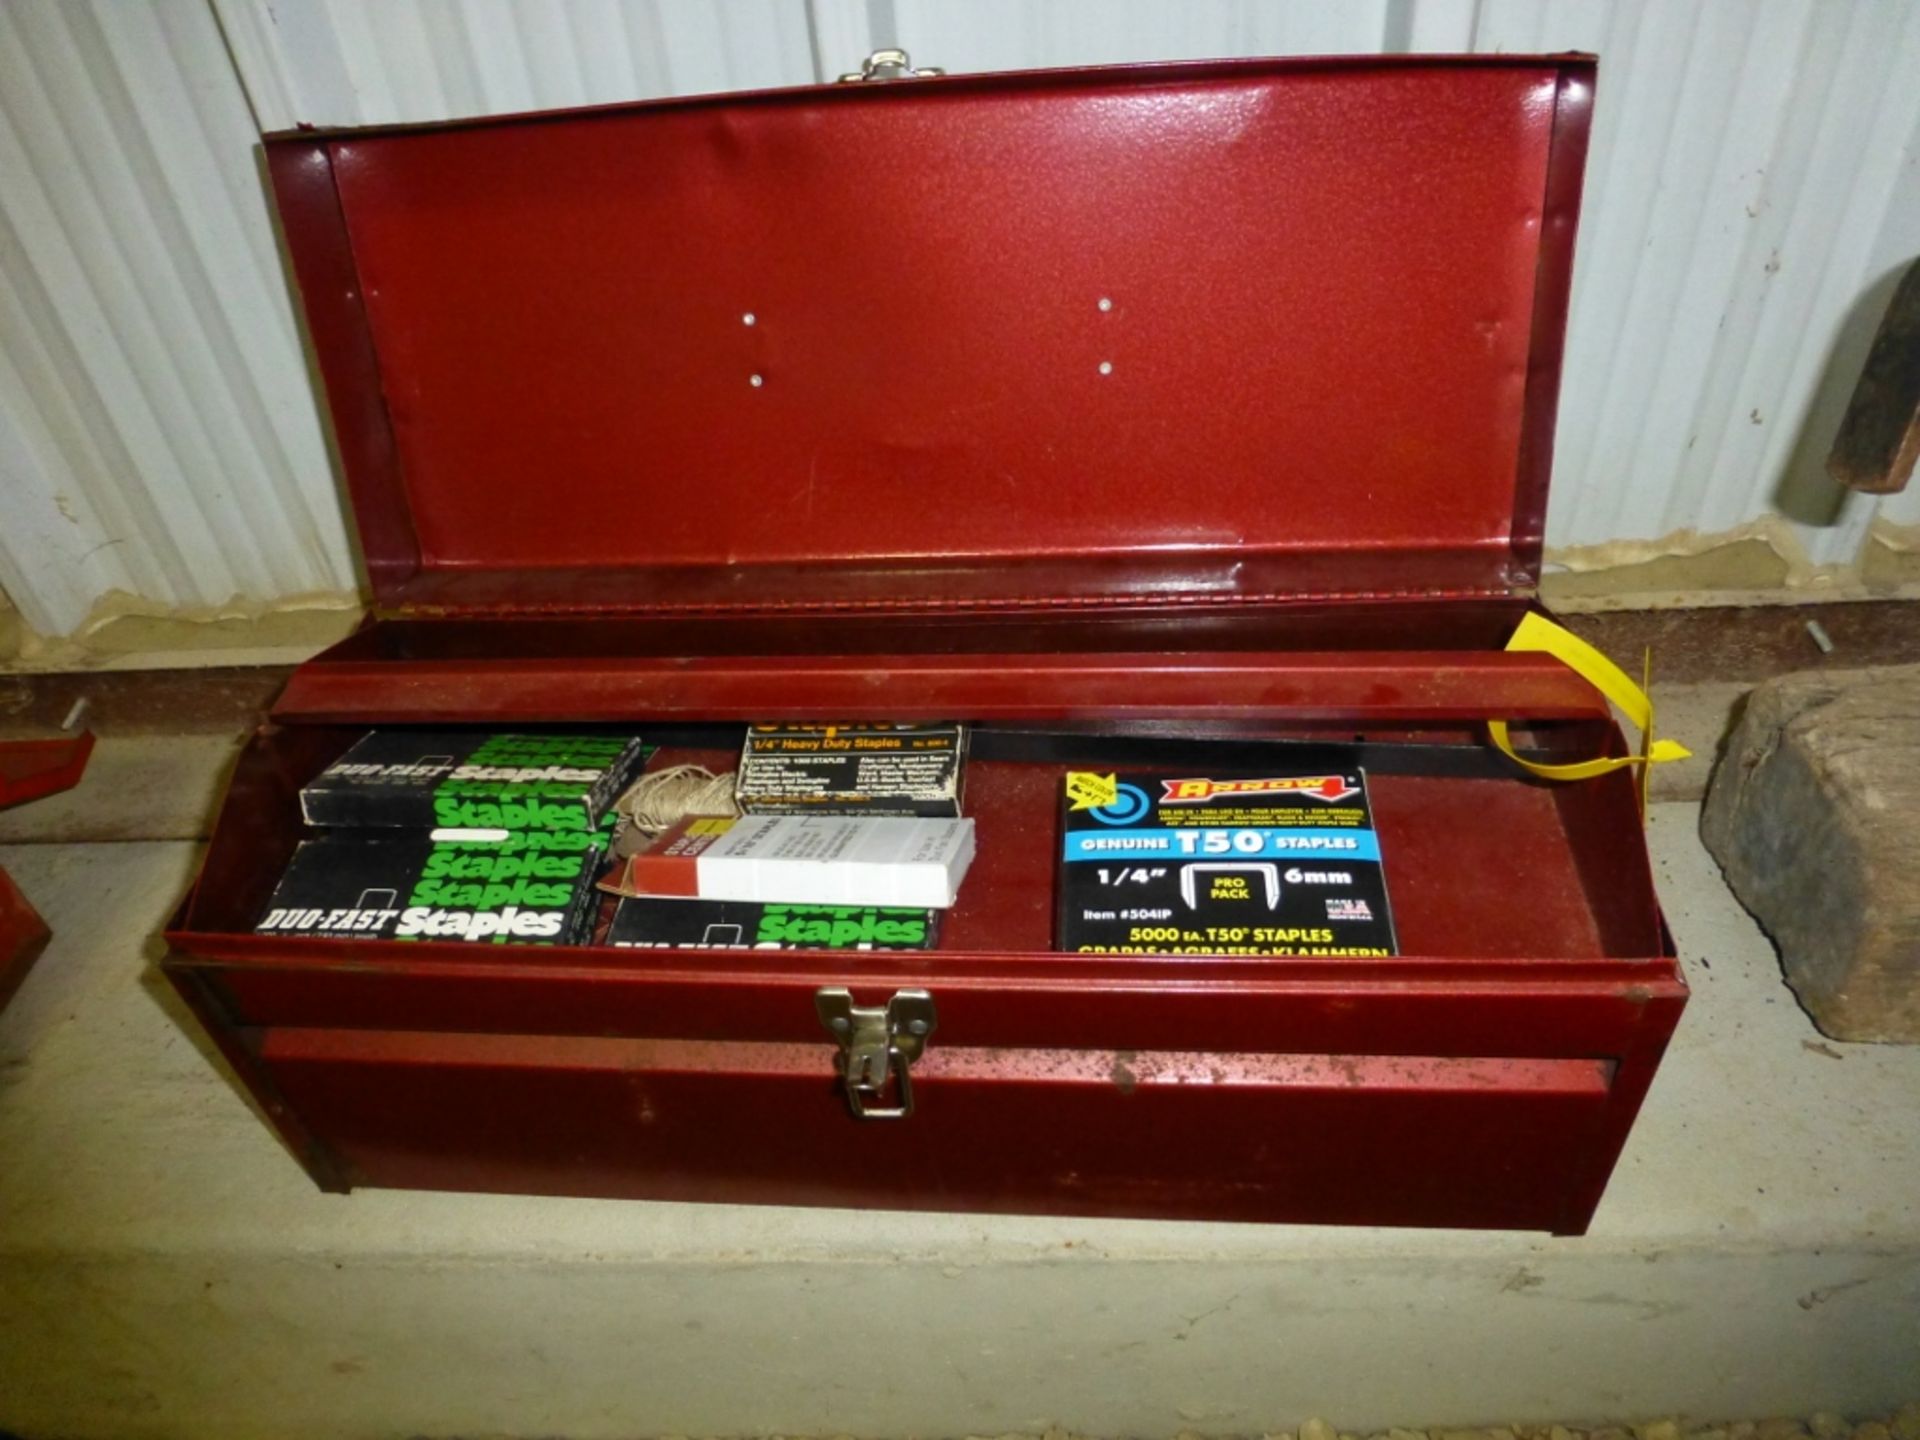 My Buddy tool box with staplers and staples